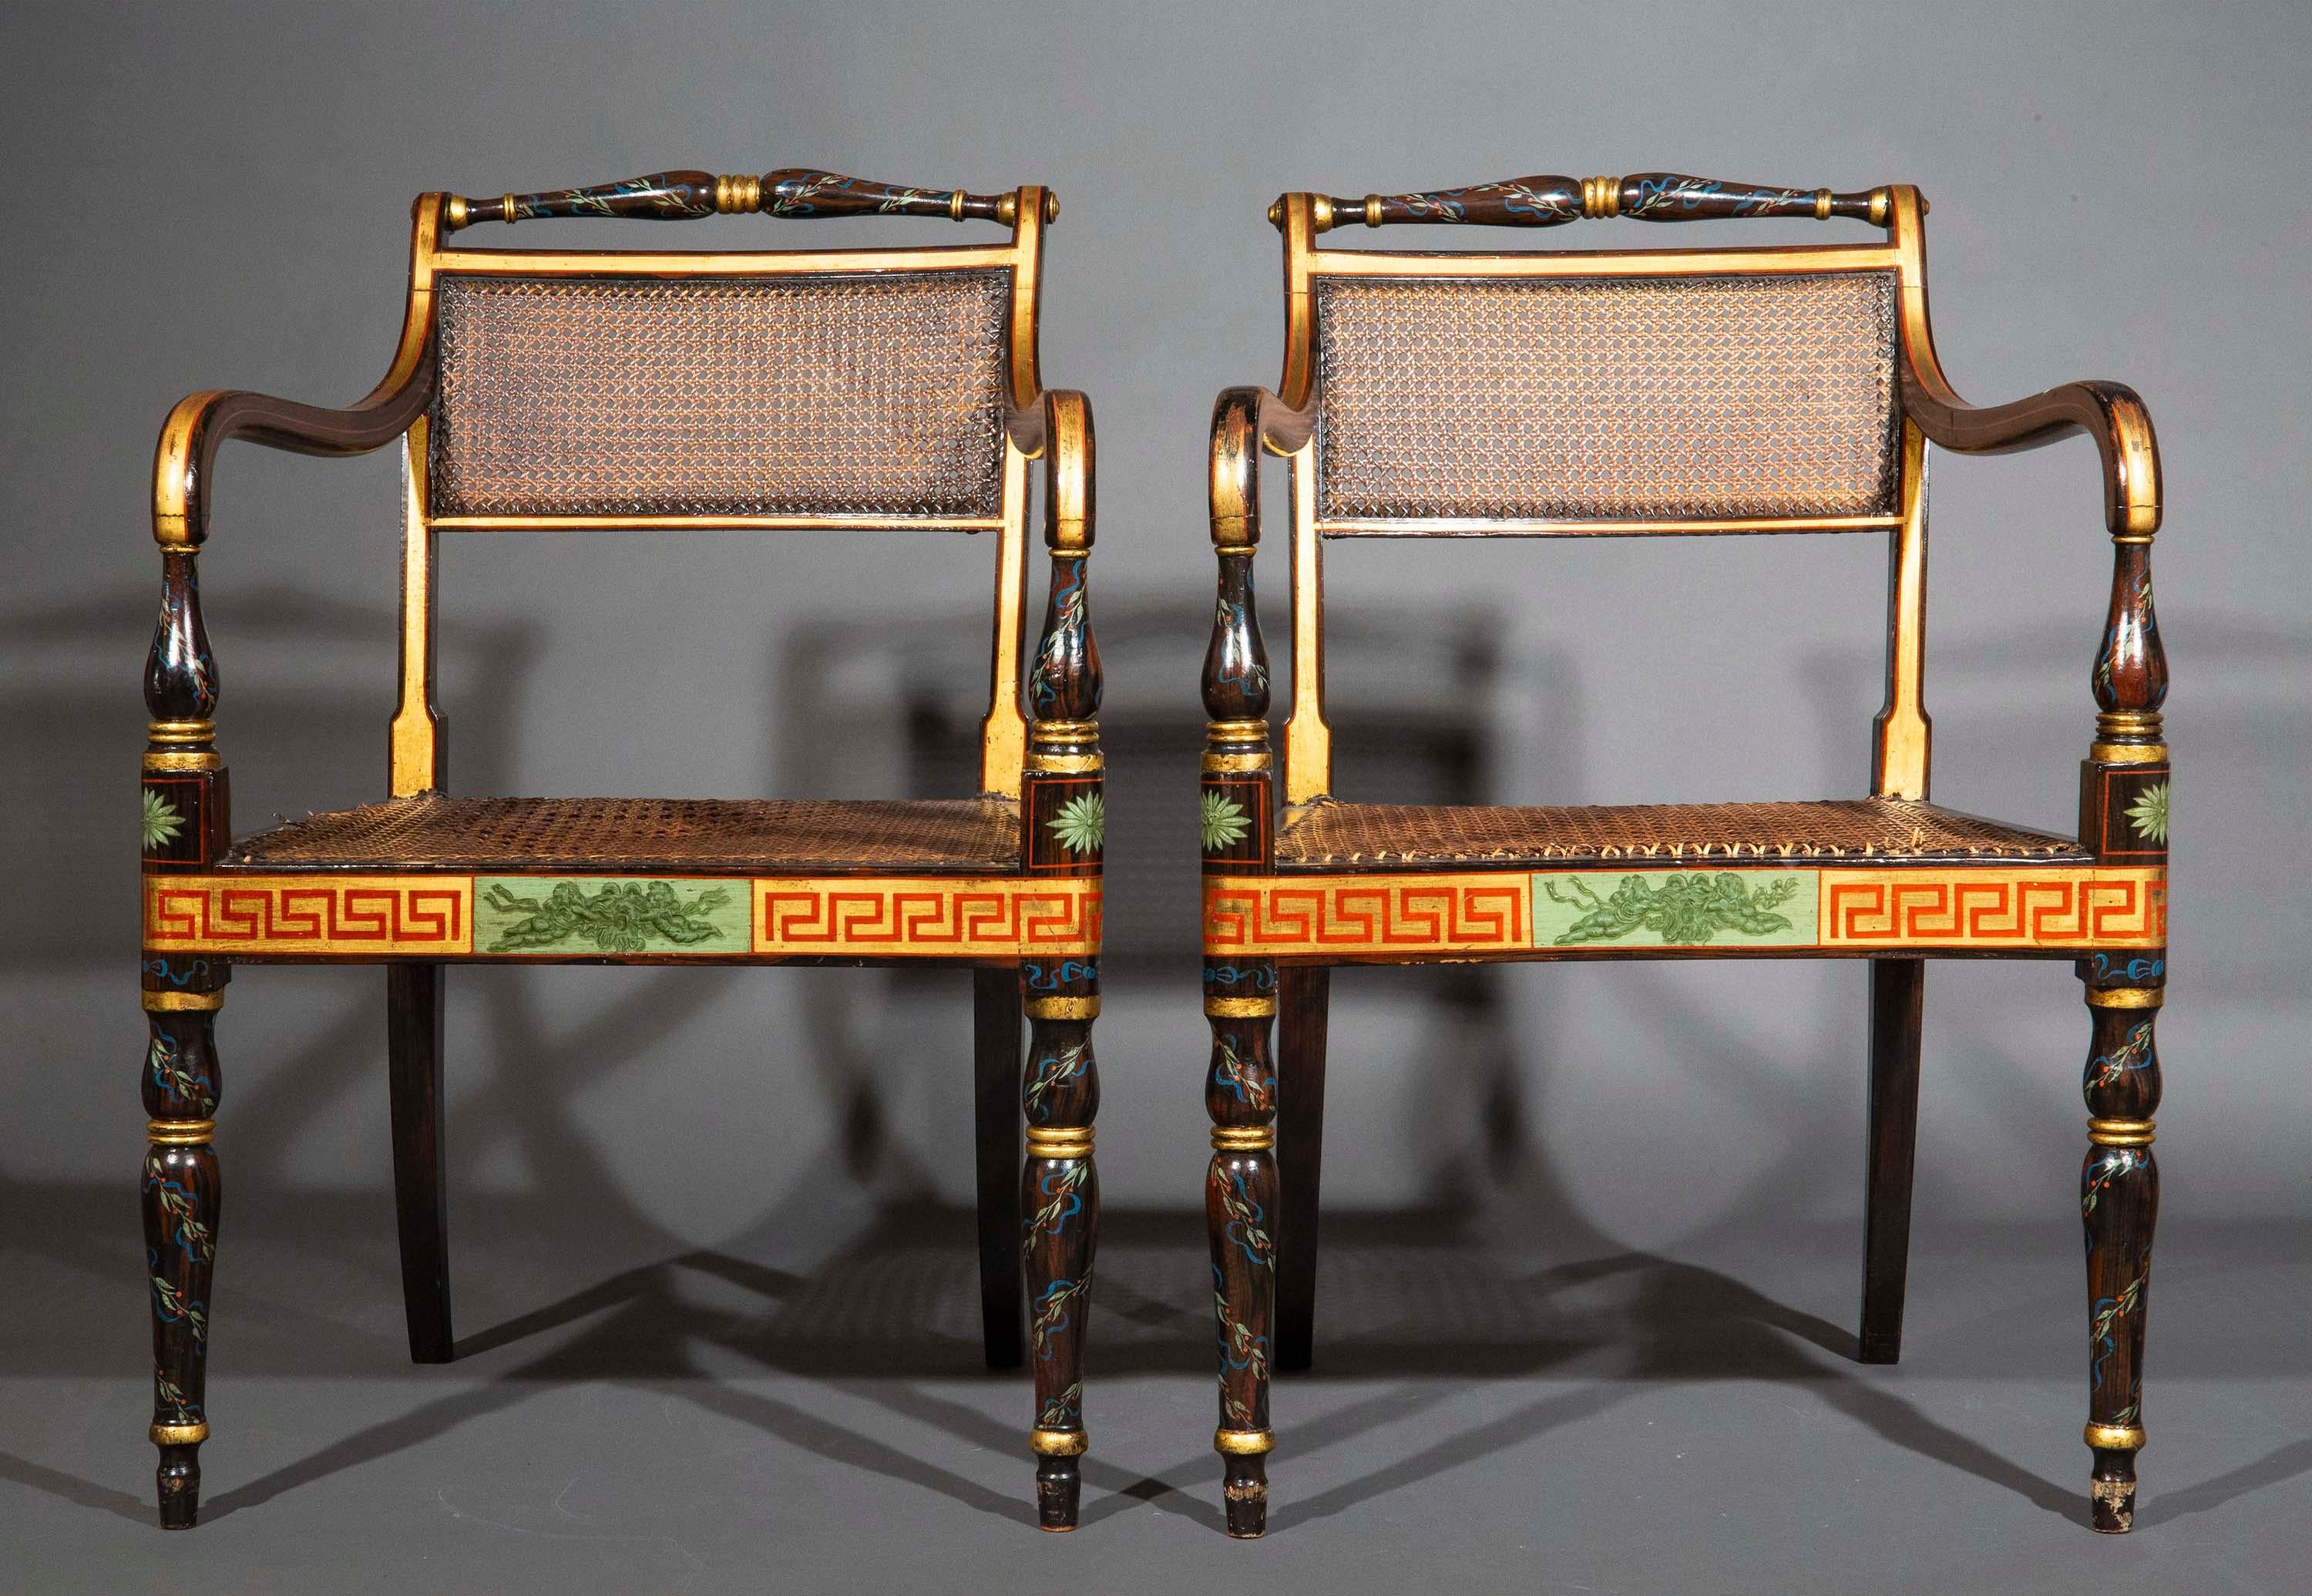 A charming pair of painted open armchairs dating back to the English Regency era, exquisitely hand-painted to simulate exotic timber and ornamented with neoclassical festive ribbons and garlands, with Greek key (meander) border to seat rails. THREE